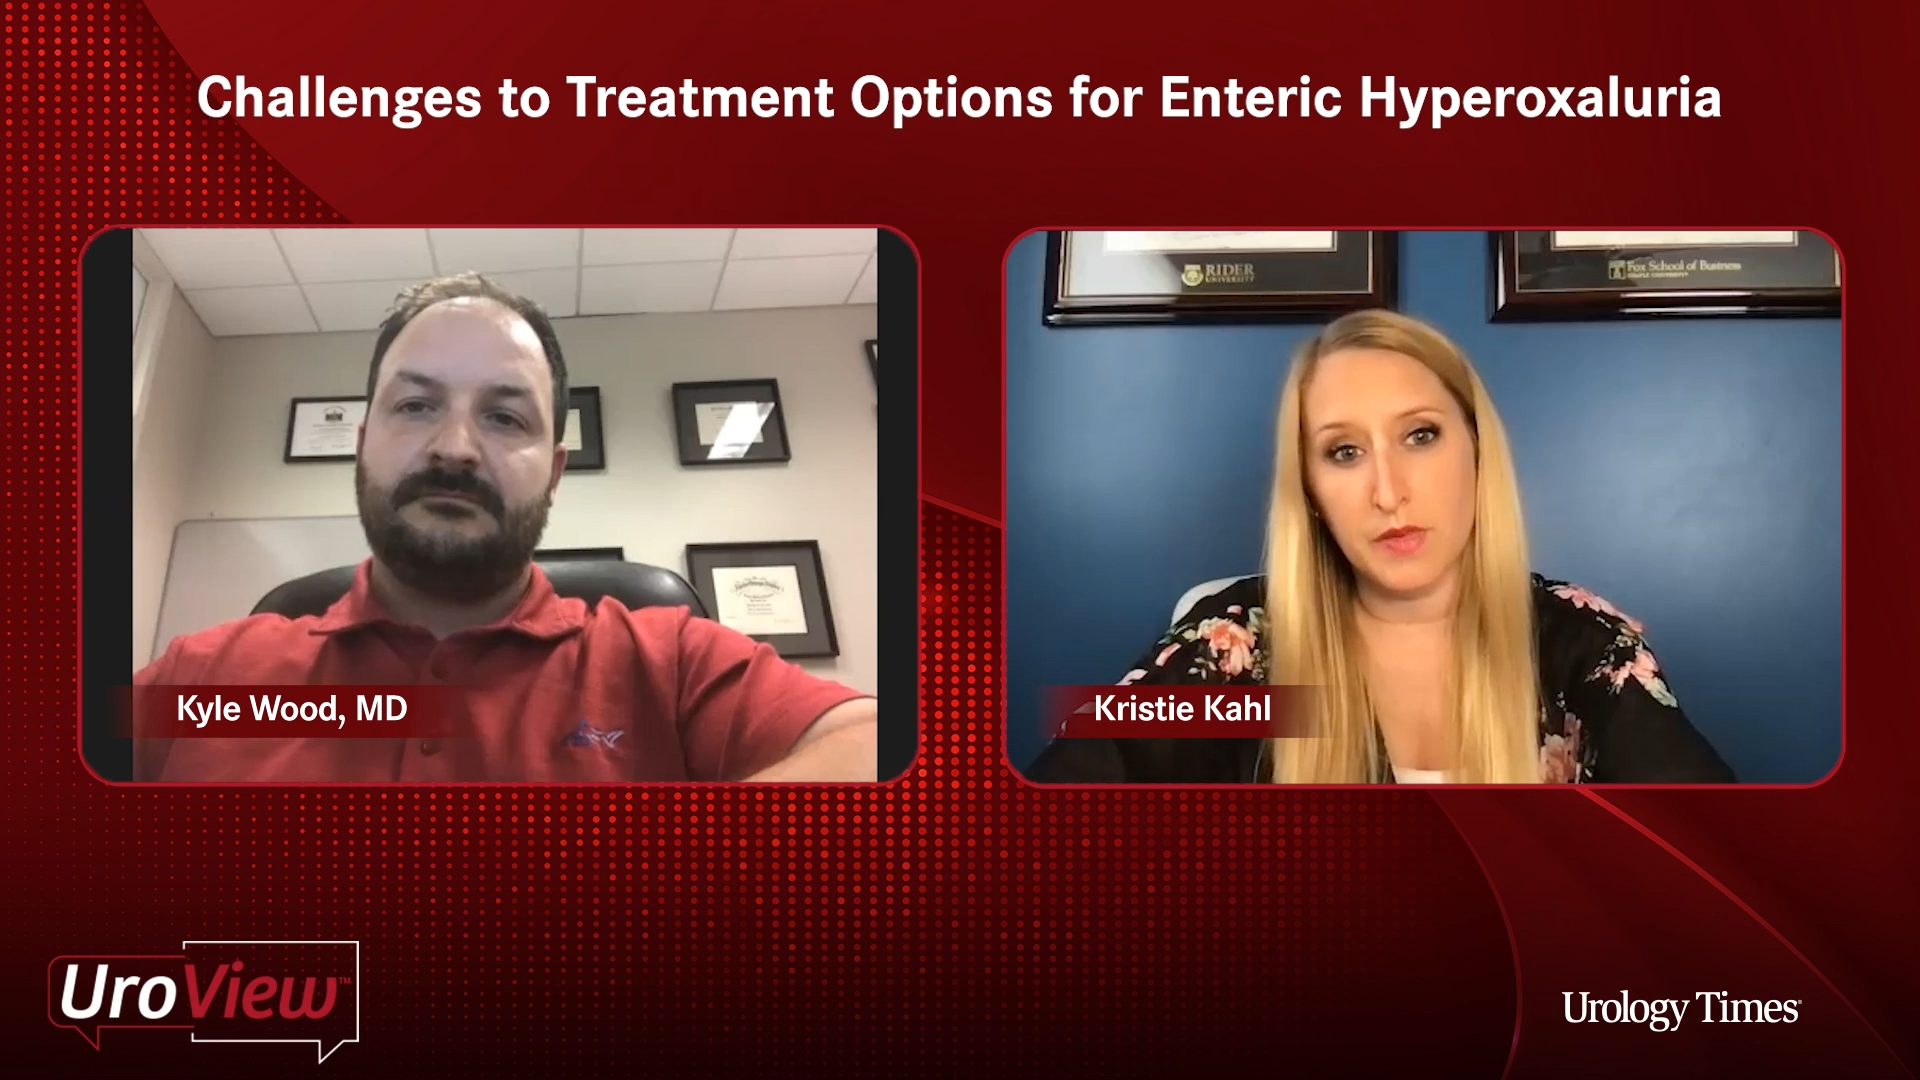 Challenges with available treatment options for enteric hyperoxaluria